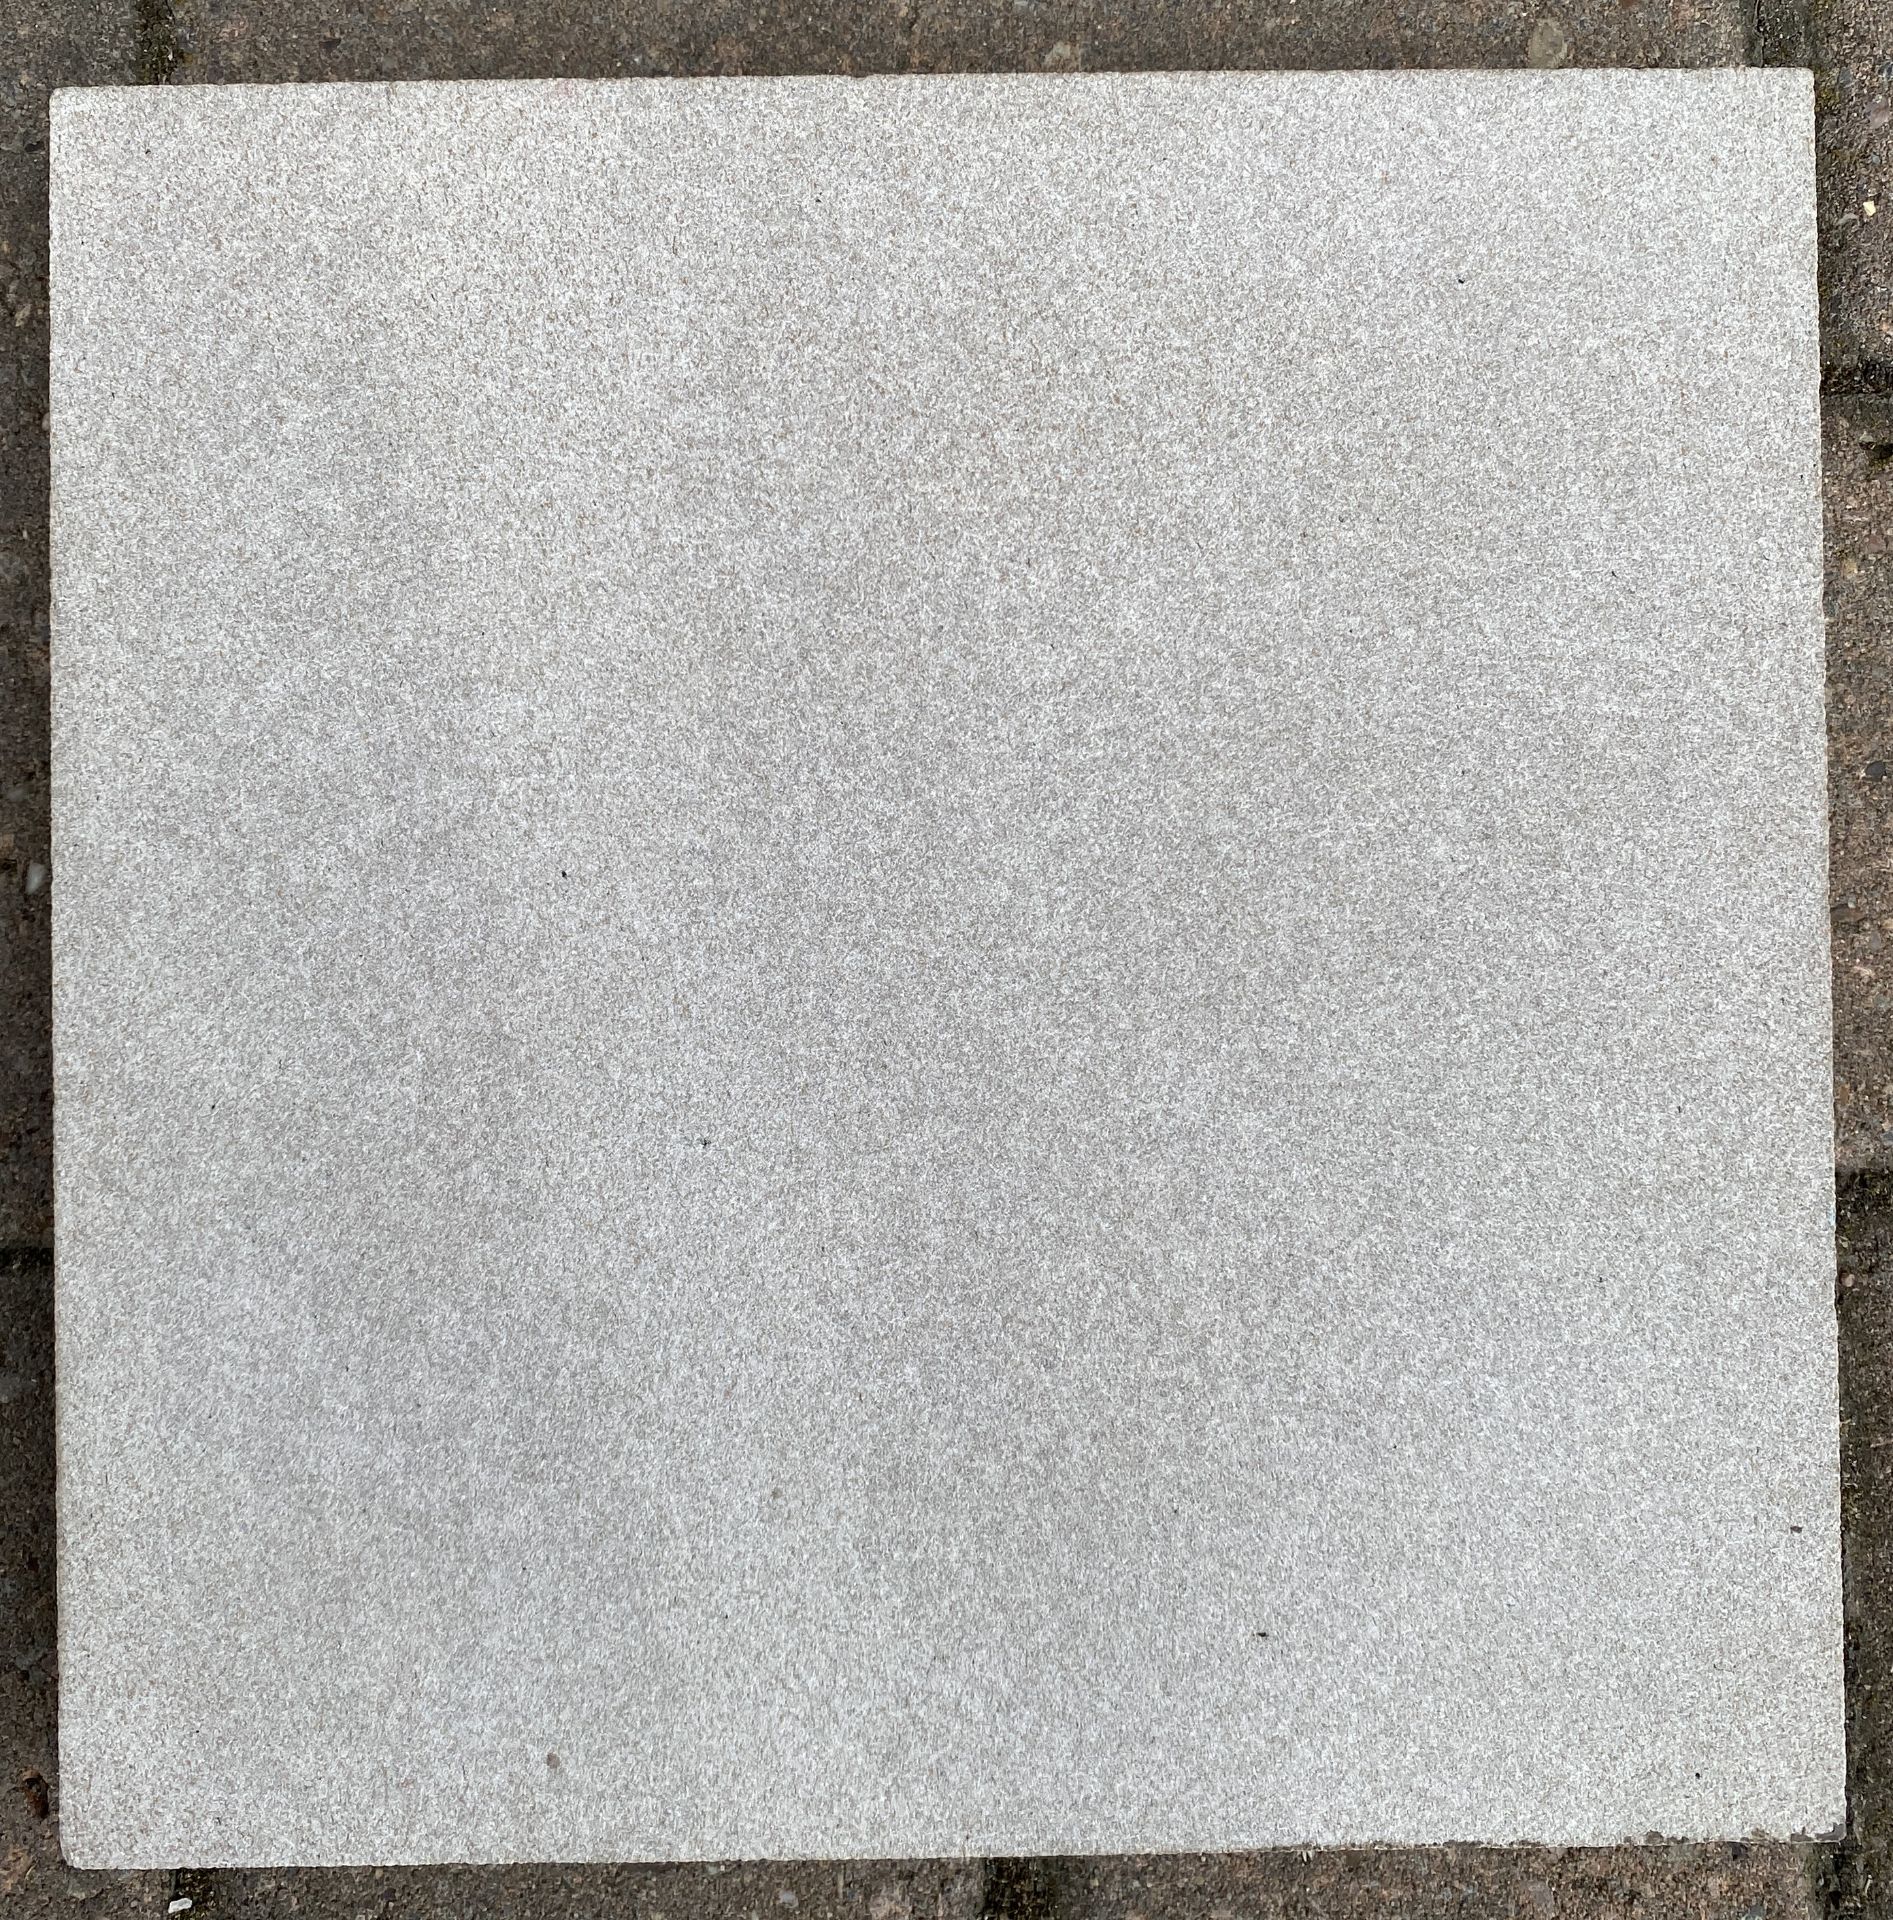 Contents to 3 pallets of BLOCKSTONE MOUSELOW NATURAL SANDSTONE, RUBBED FINISH FACING/PATIO STONE. - Image 4 of 8